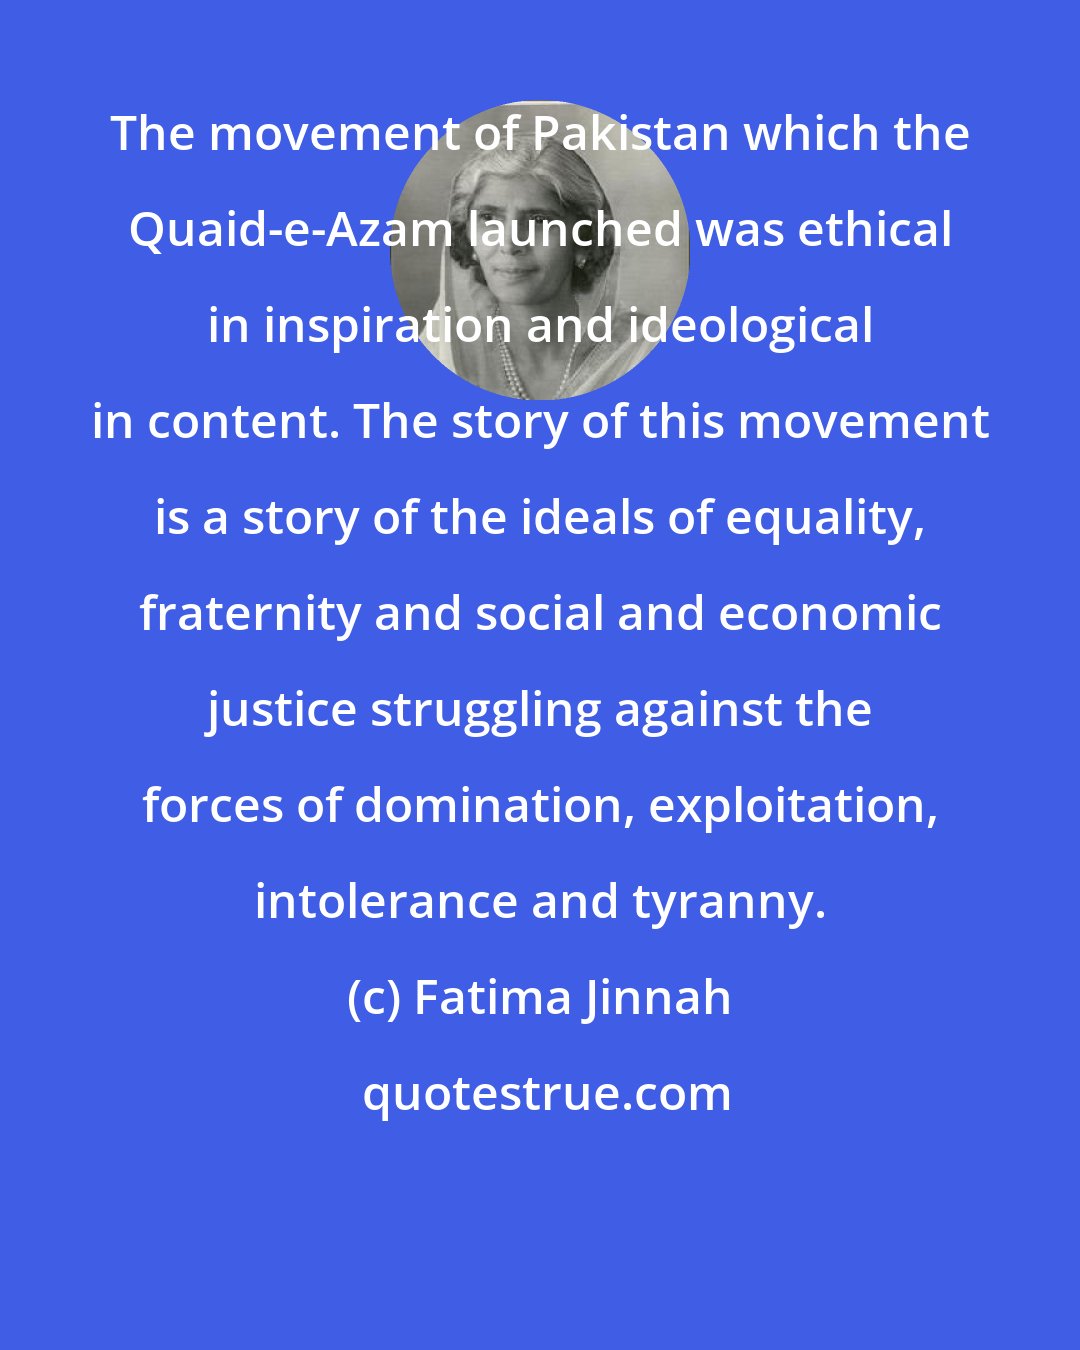 Fatima Jinnah: The movement of Pakistan which the Quaid-e-Azam launched was ethical in inspiration and ideological in content. The story of this movement is a story of the ideals of equality, fraternity and social and economic justice struggling against the forces of domination, exploitation, intolerance and tyranny.